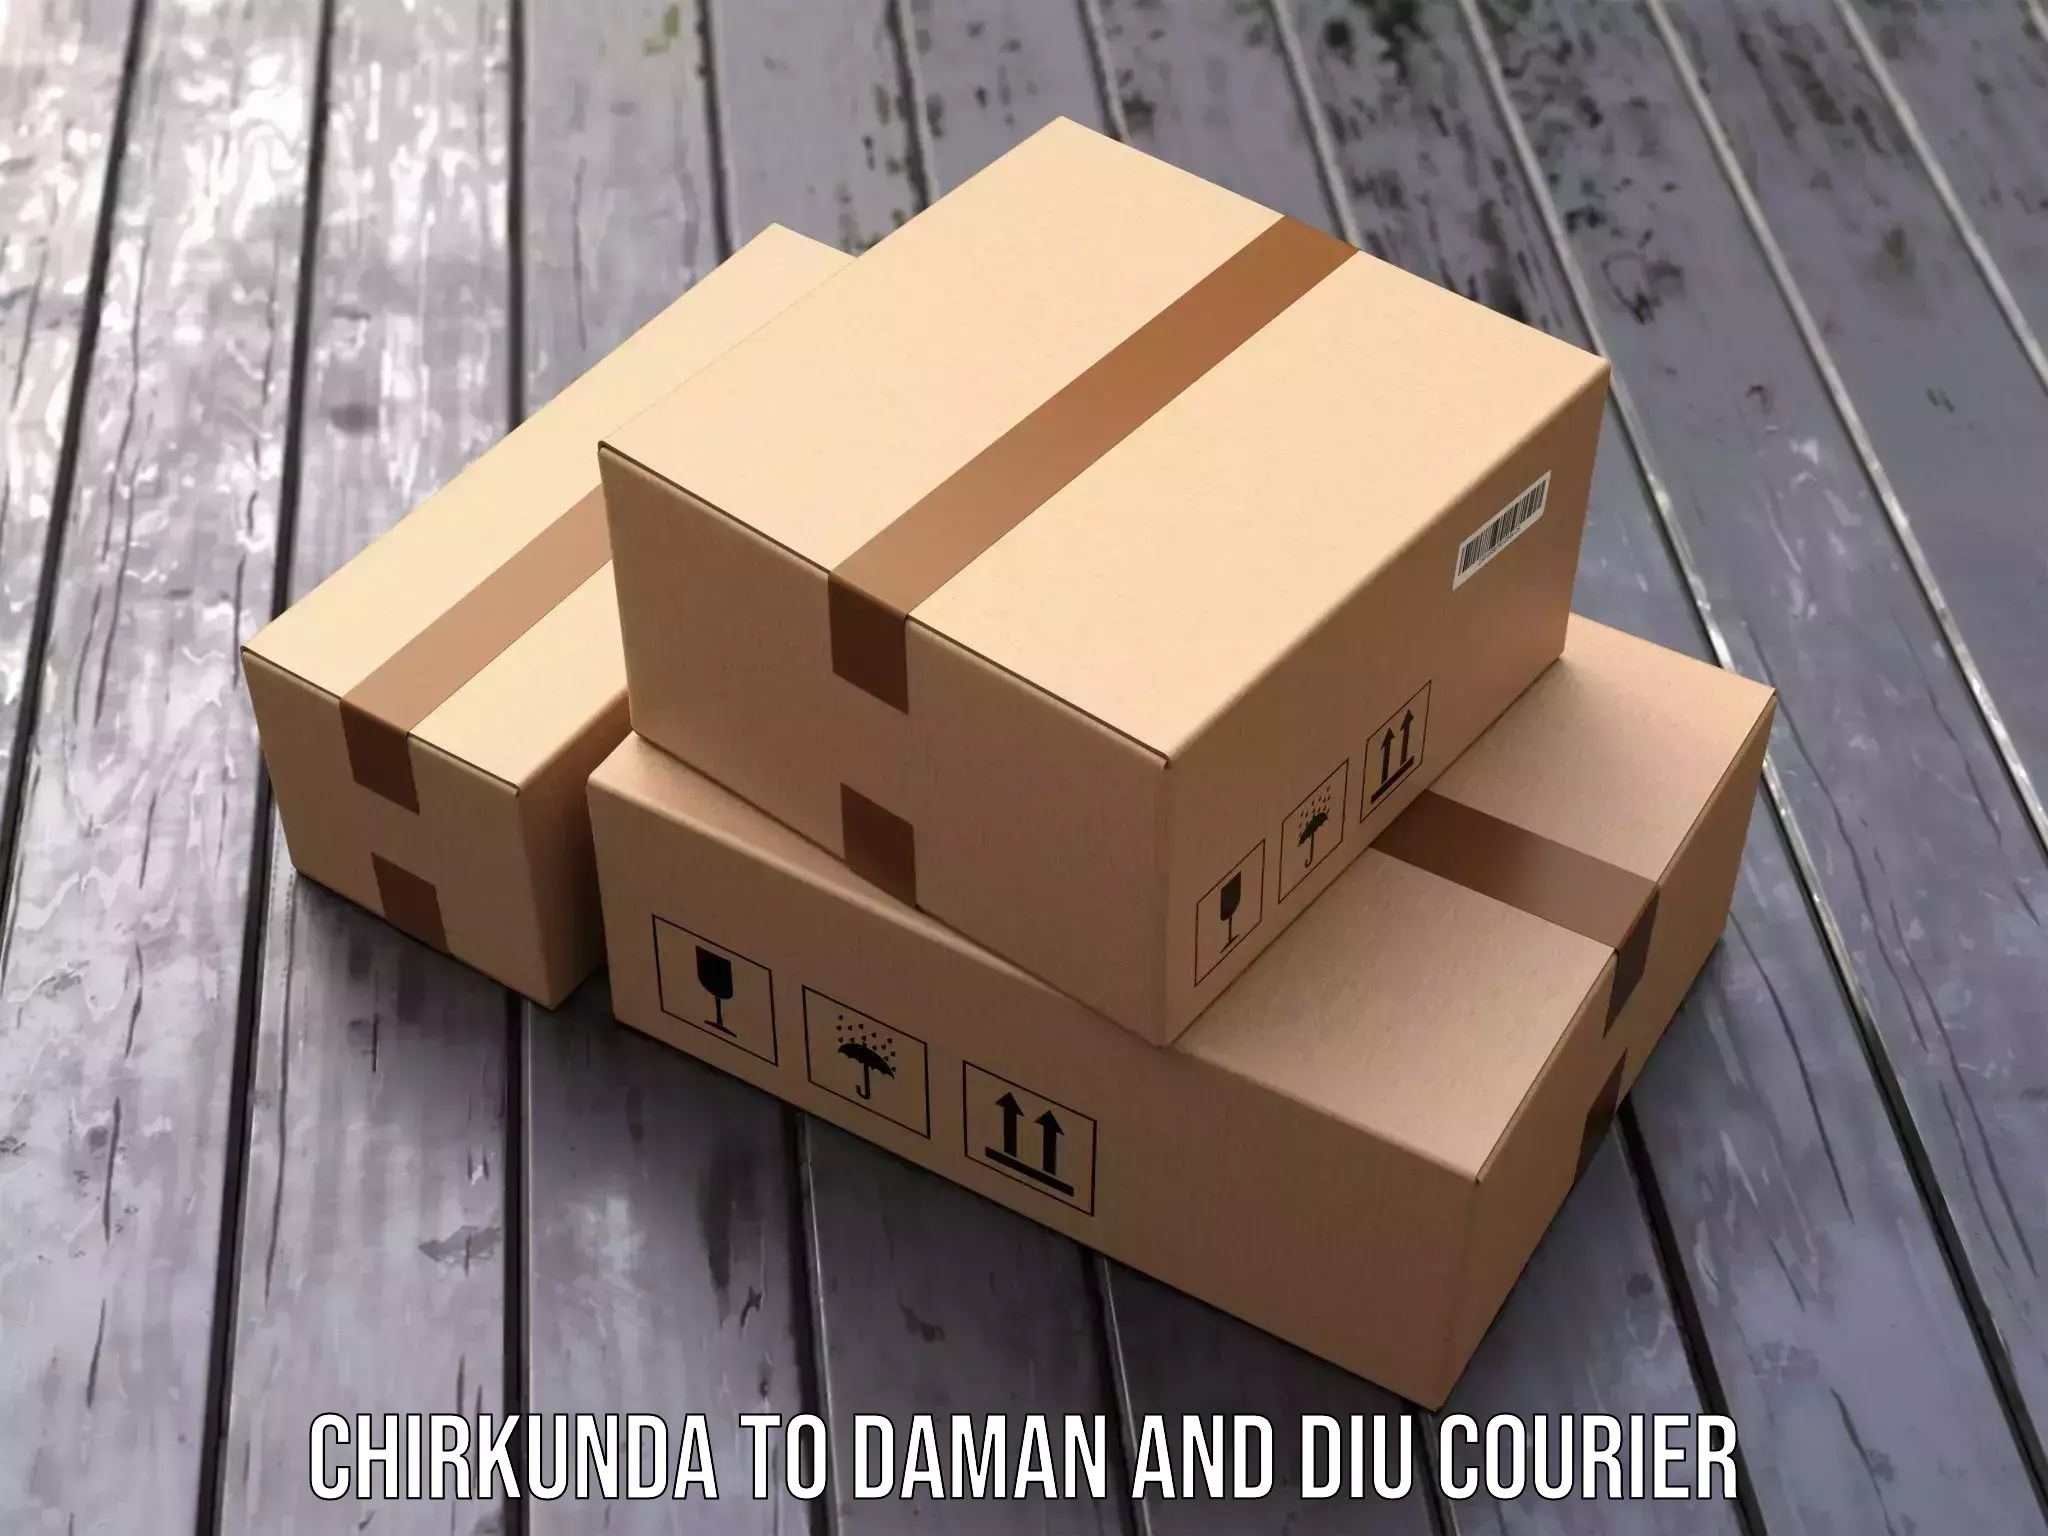 Automated parcel services Chirkunda to Daman and Diu